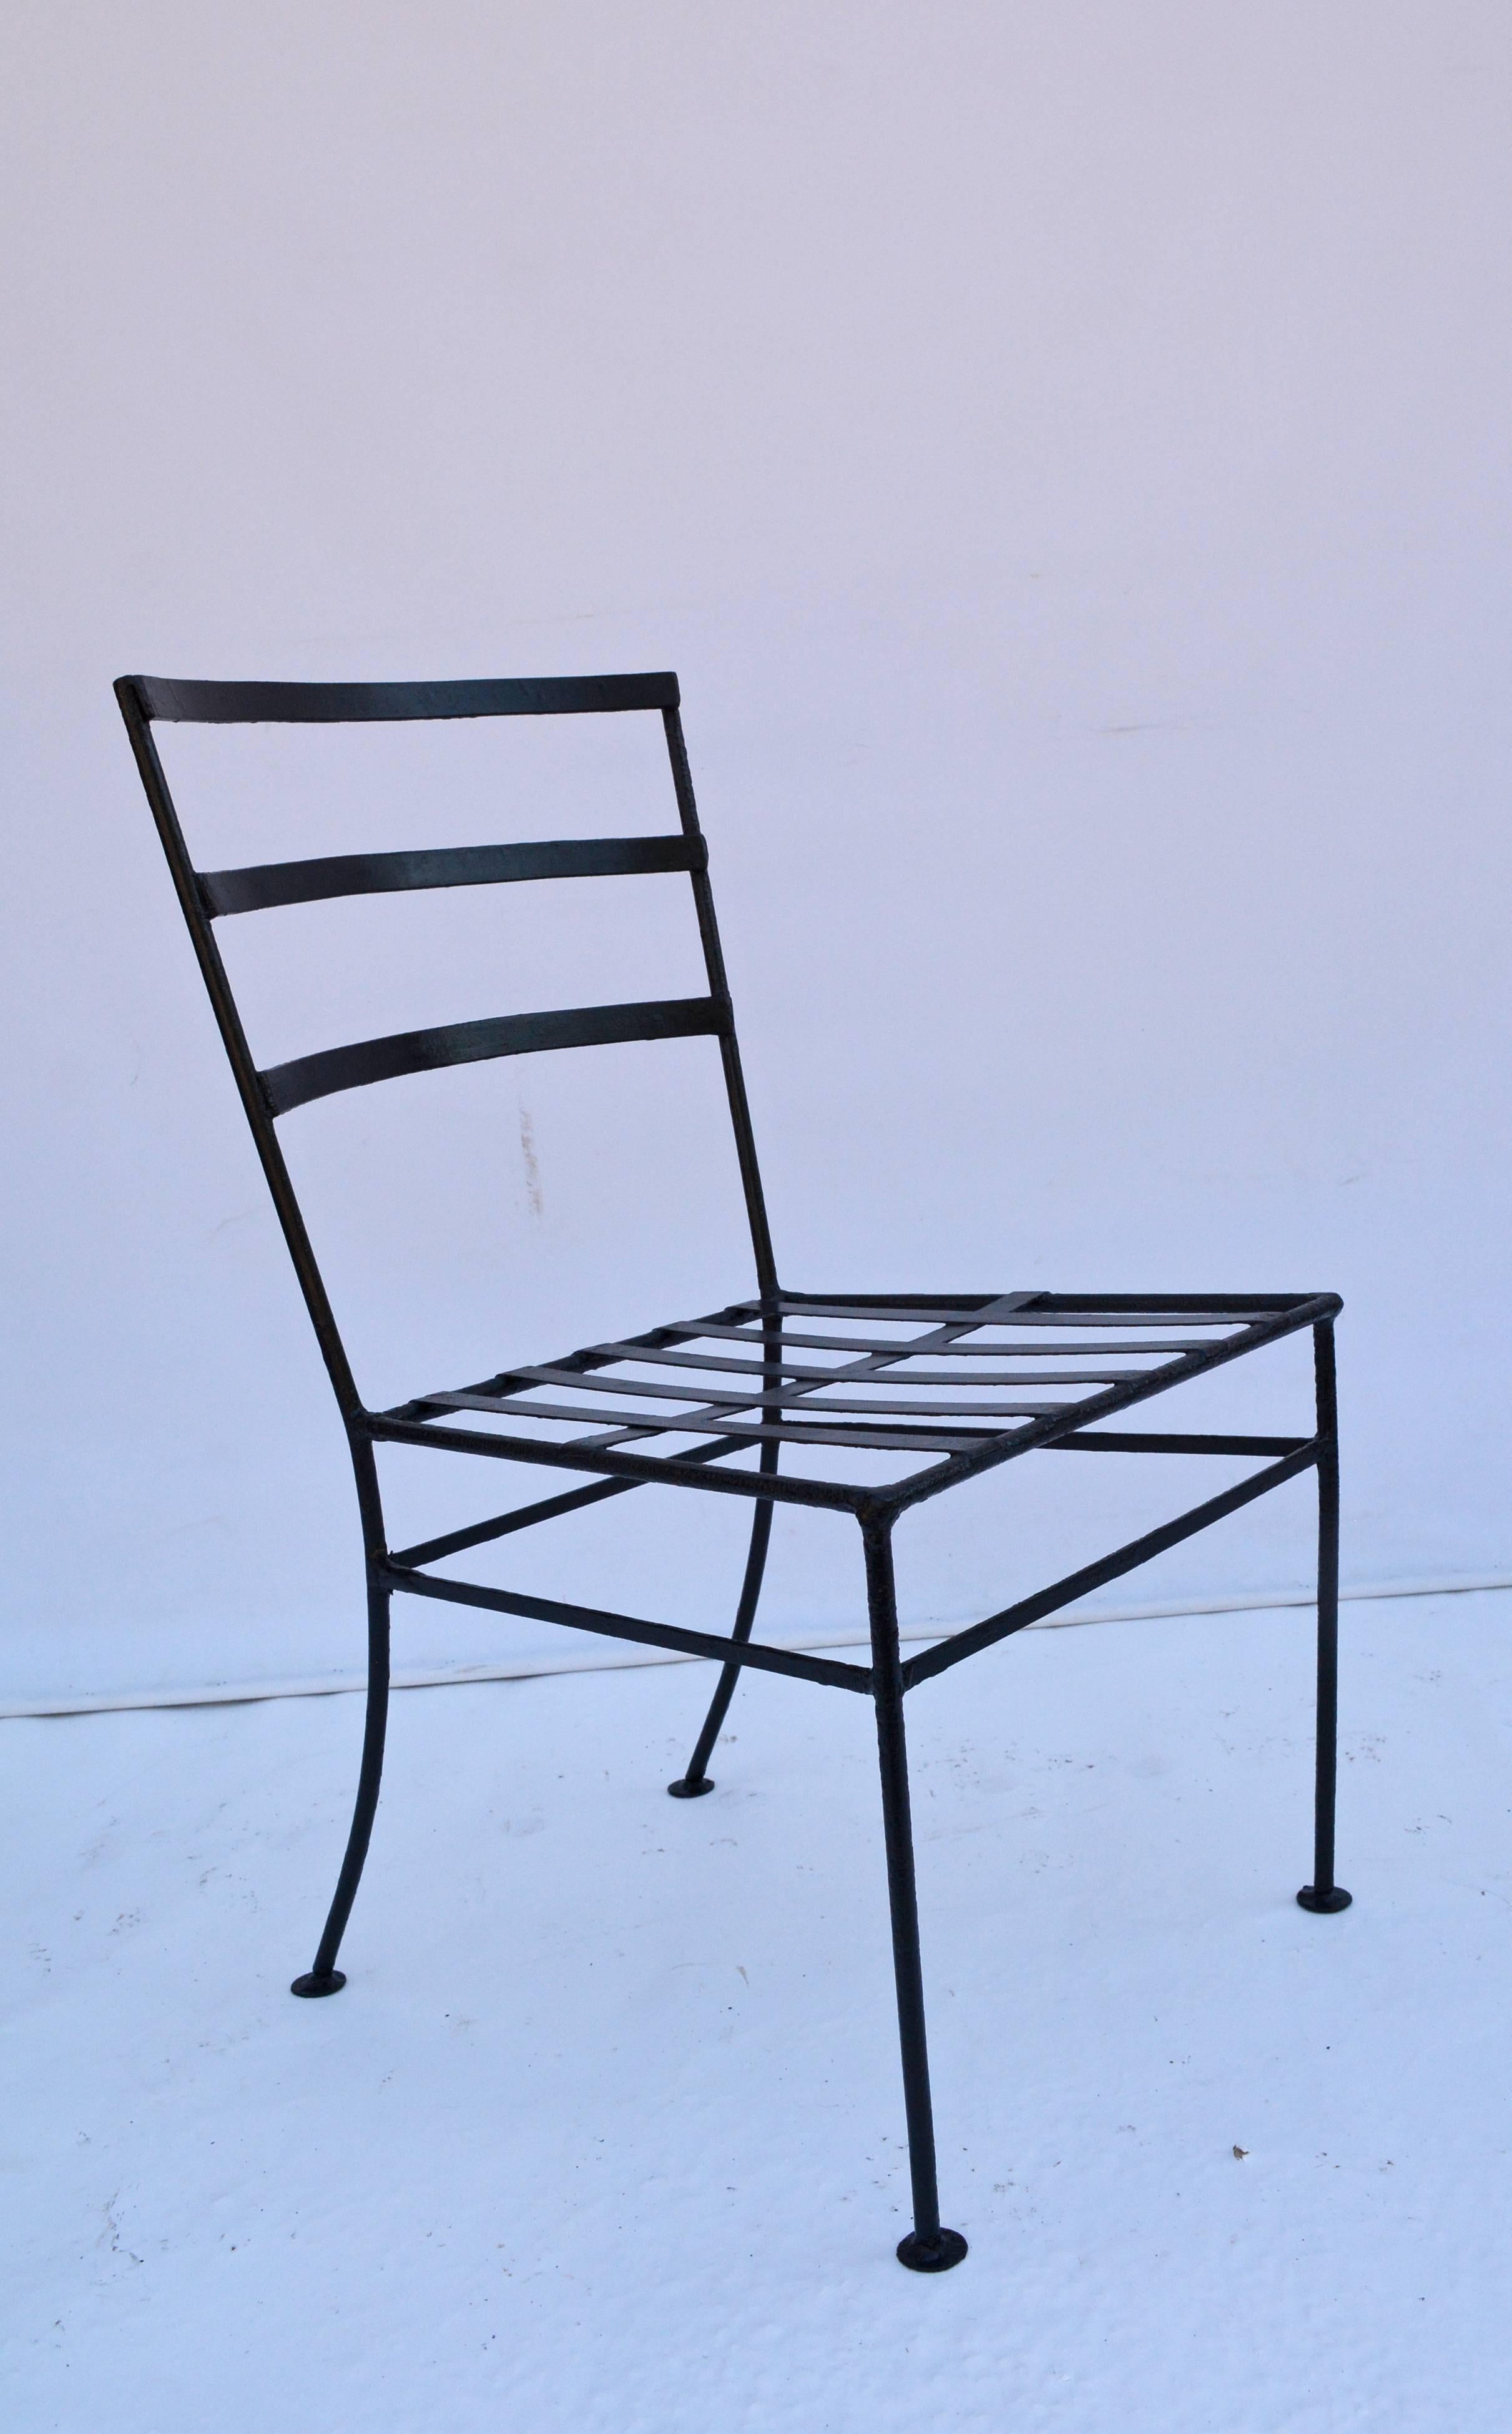 Vintage metal garden lounge or dining chairs are made of black wrought iron. One chair has arms and the other is armless. The cross-hatch seats are ready for the cushions of your choice.

Measures: Armchair: seat 16.25